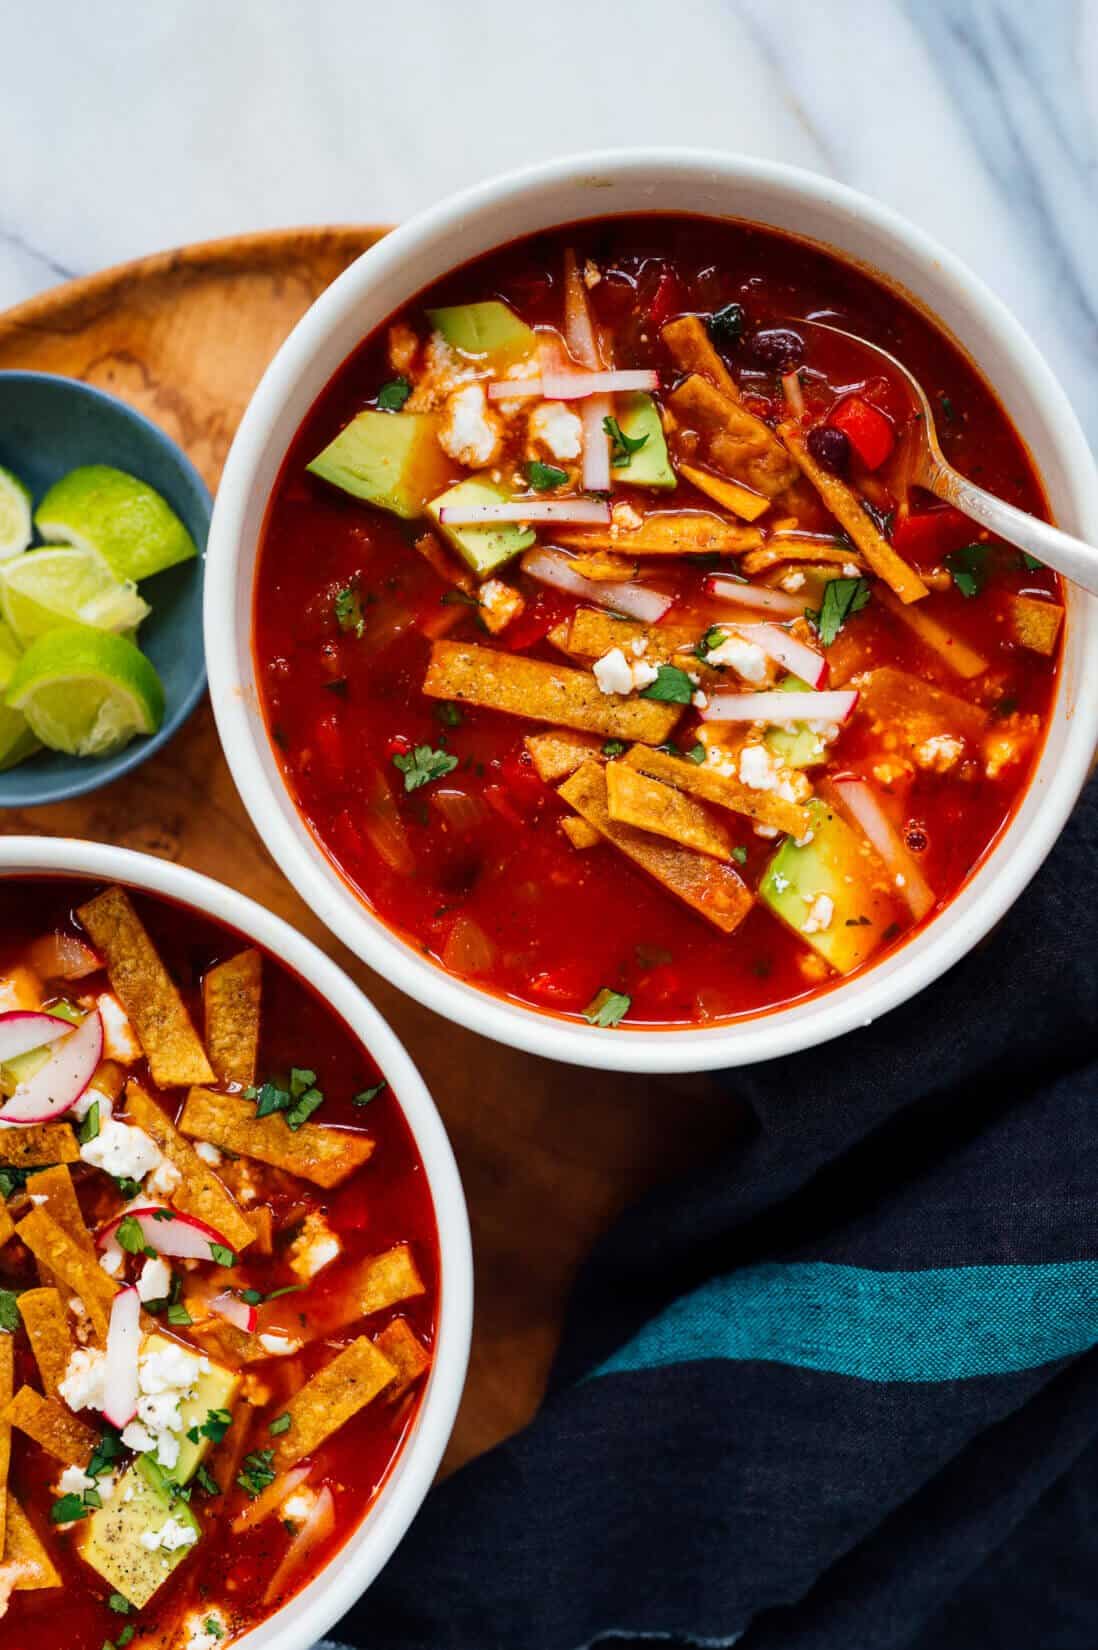 Bowl of tortilla soup with garnishes.